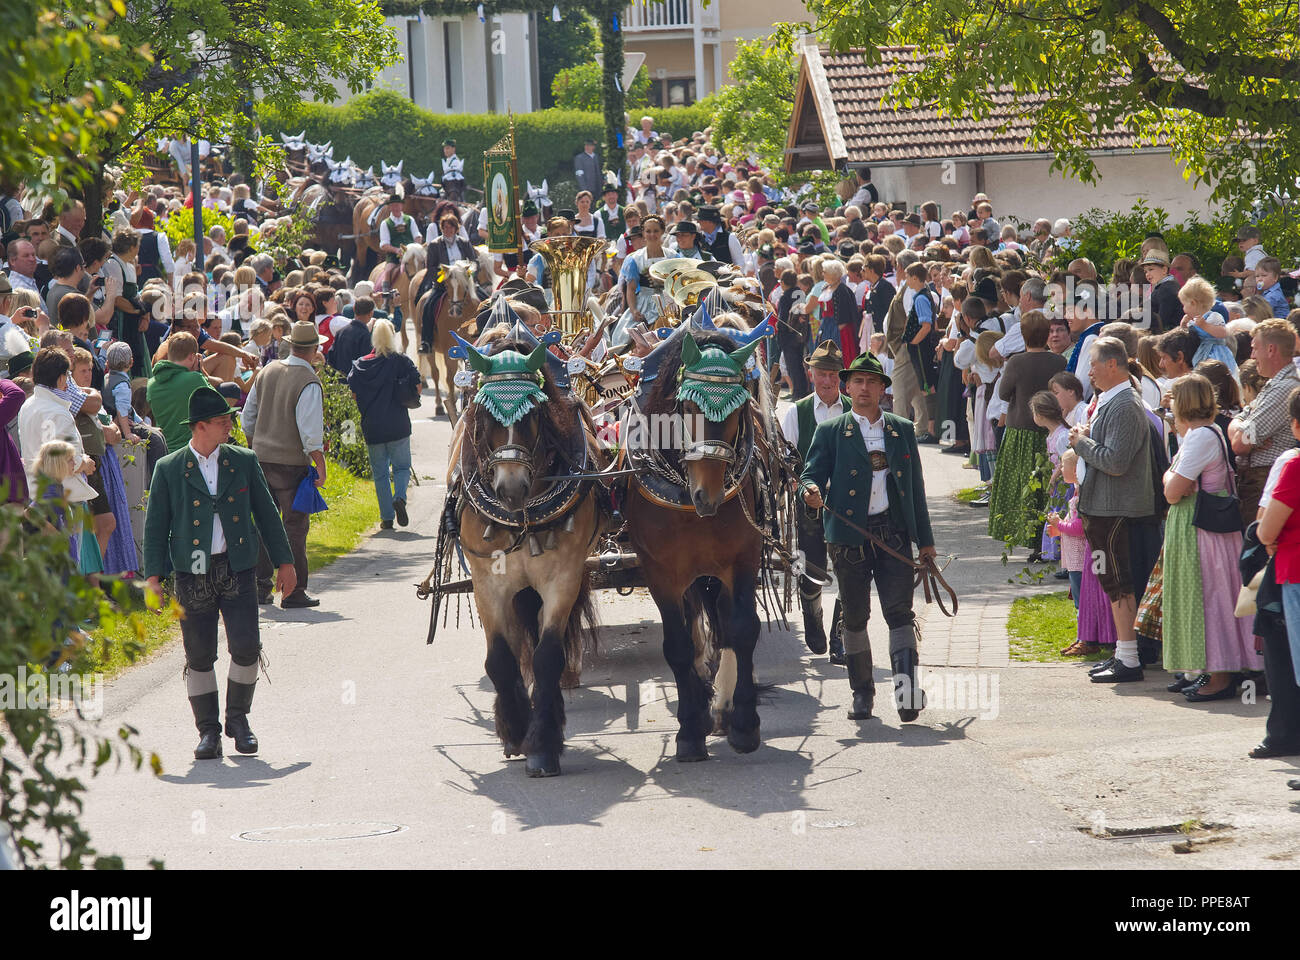 Riders on traditionally adorned horses at the Leonhardiritt (St. Leonard's Ride) in Holzhausen - Teisendorf, Upper Bavaria. The procession where the beautifully decorated horses are blessed was first mentioned in 1612. Stock Photo